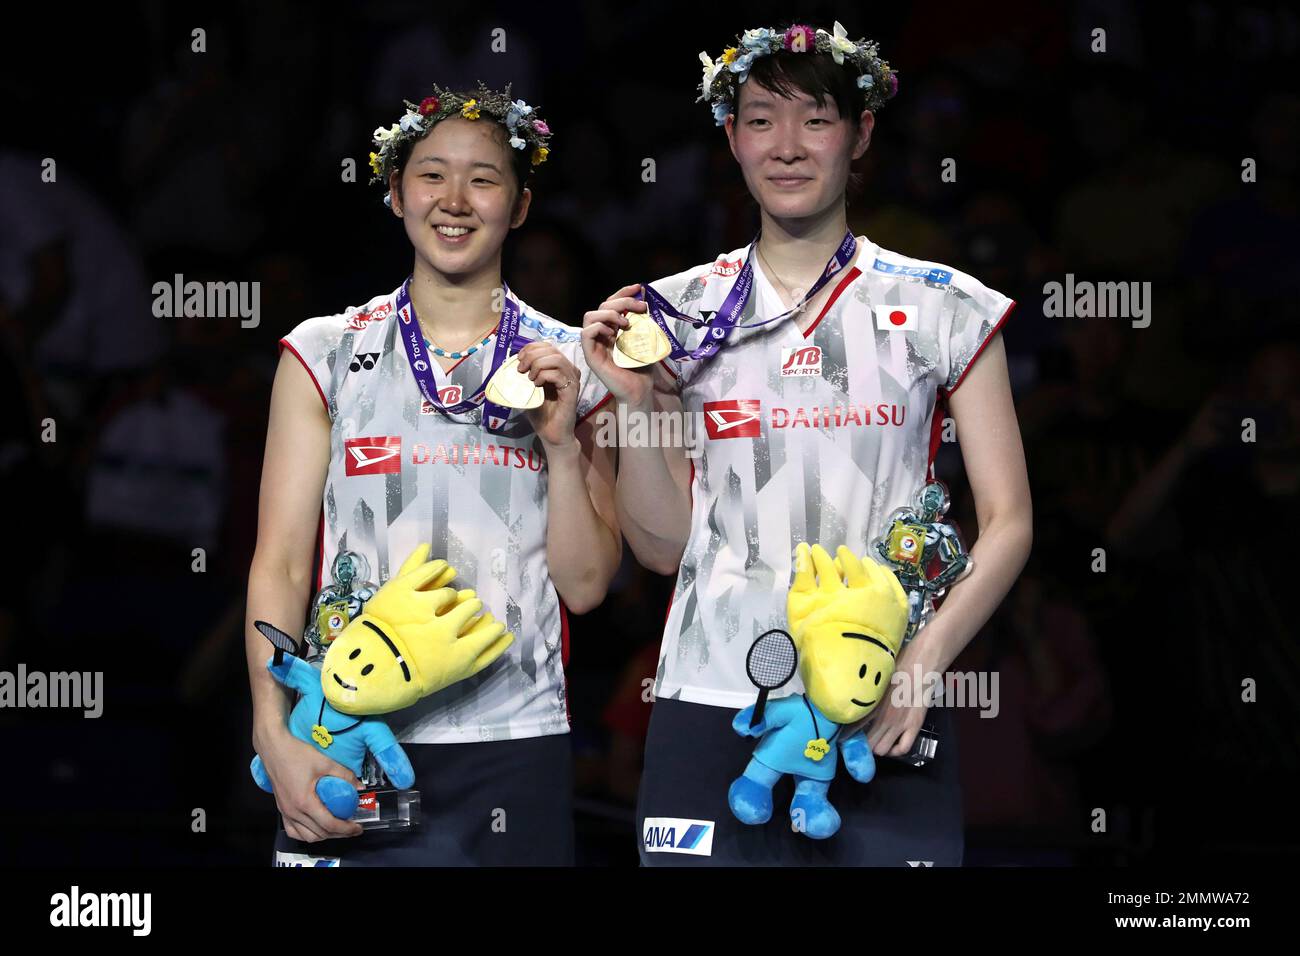 Wakana Nagahara, left, and Mayu Matsumoto of Japan stand with their medals after winning the womens badminton doubles championship match at the BWF World Championships in Nanjing, China, Sunday, Aug